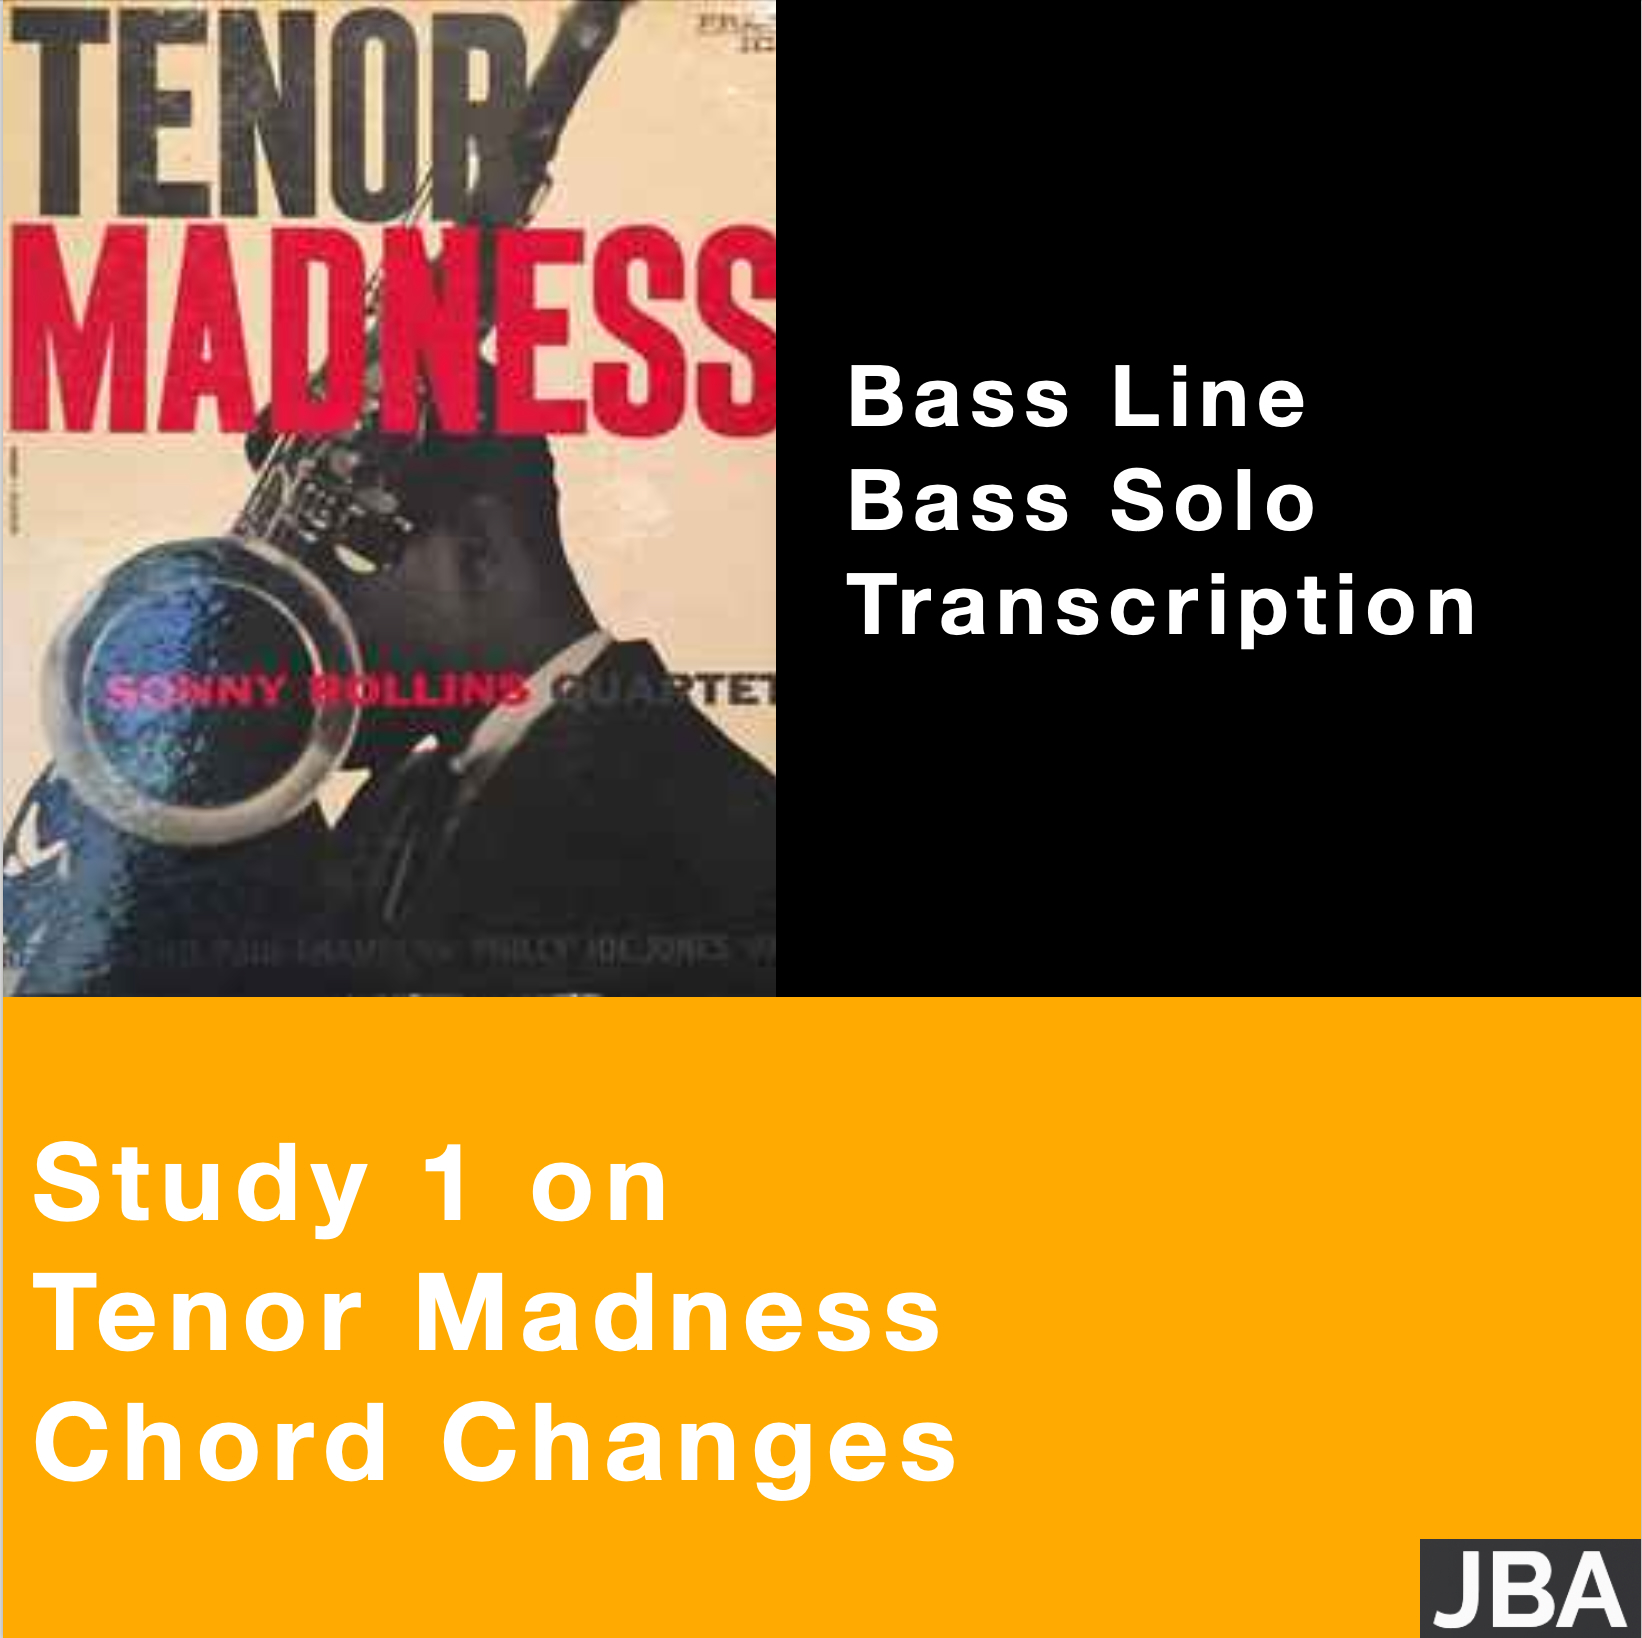 Study 1 on Tenor Madness chord changes